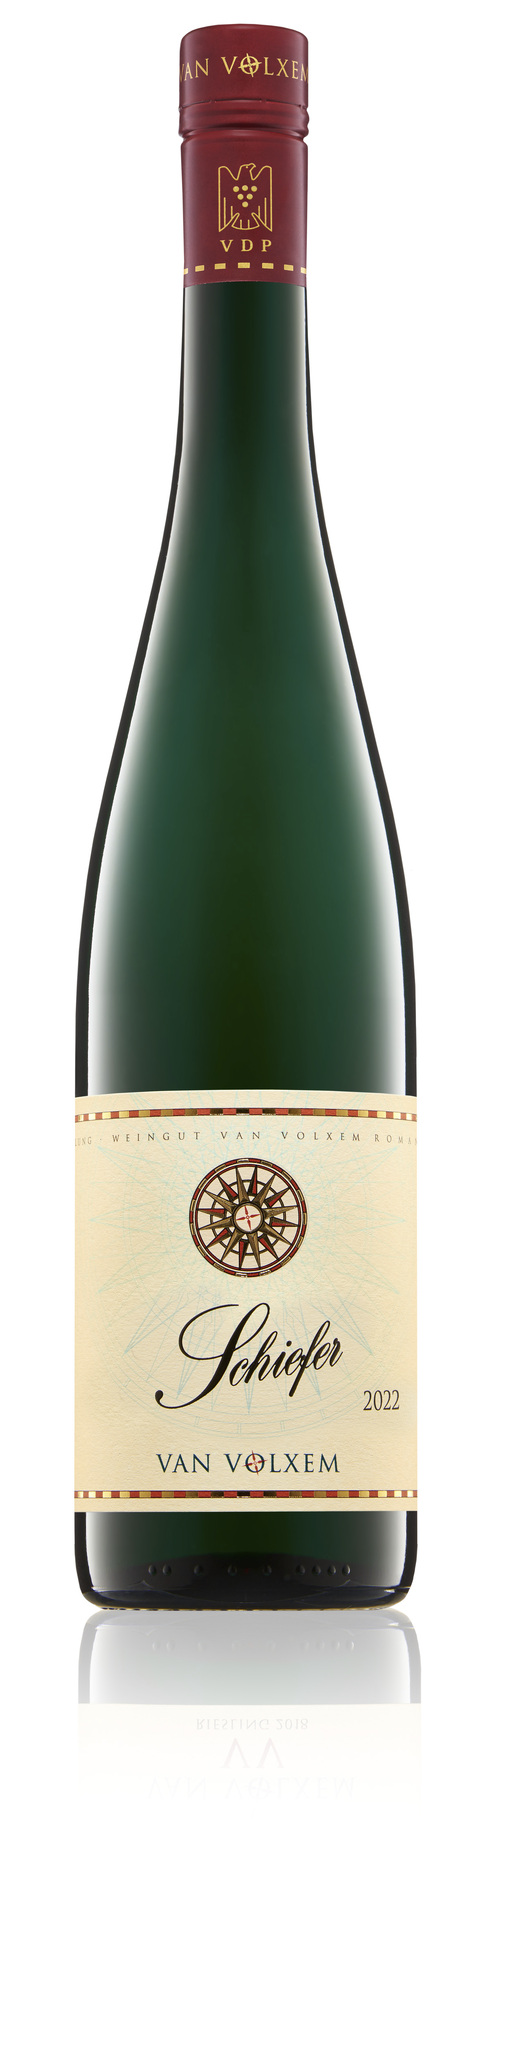 Riesling Schiefer 2020 0,75 l - (3/7)